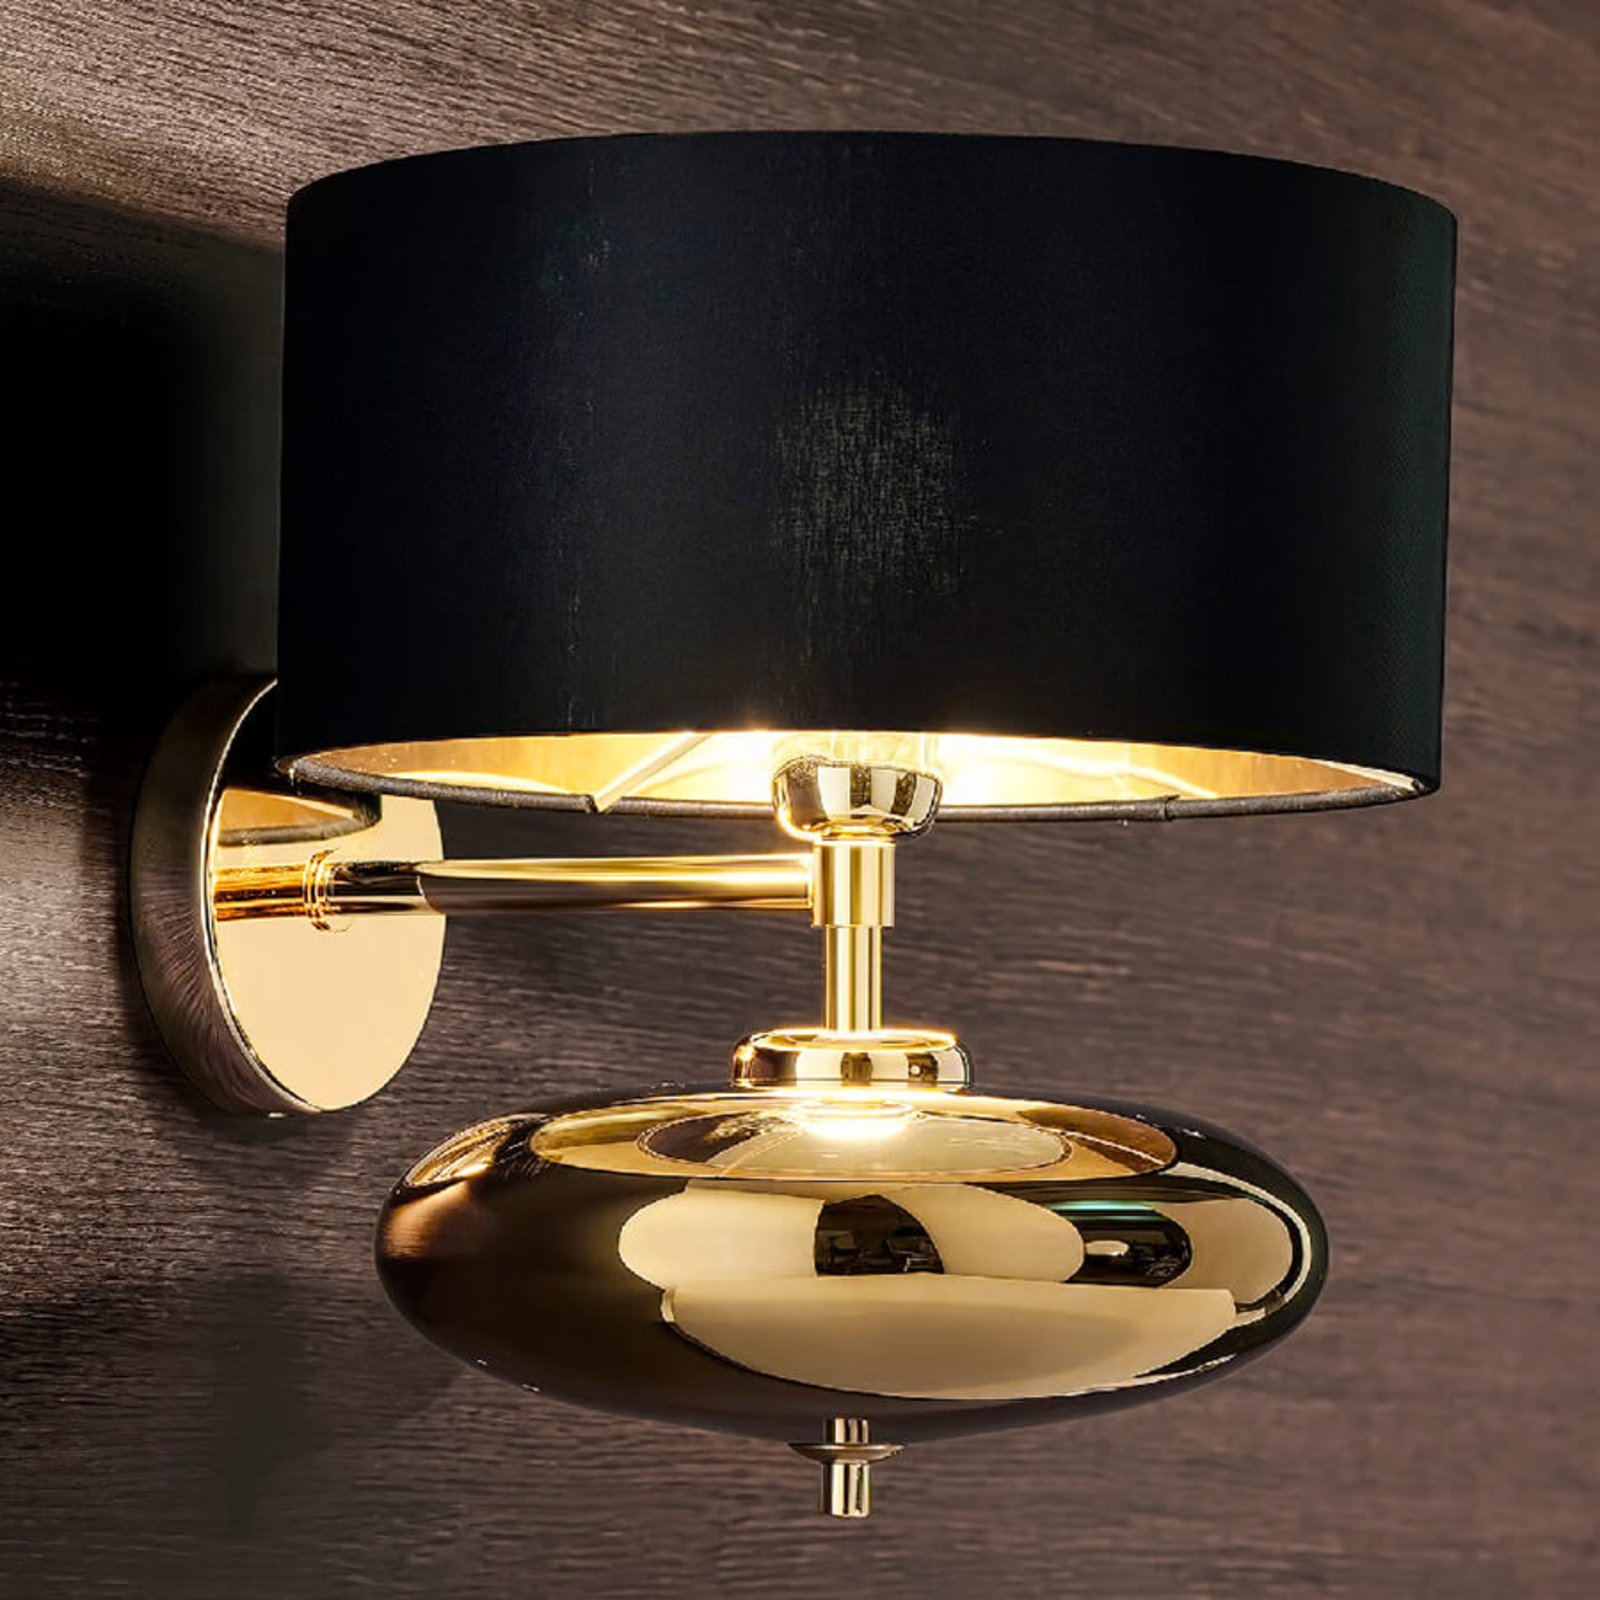 Black and gold - Show Ellisse textile wall light